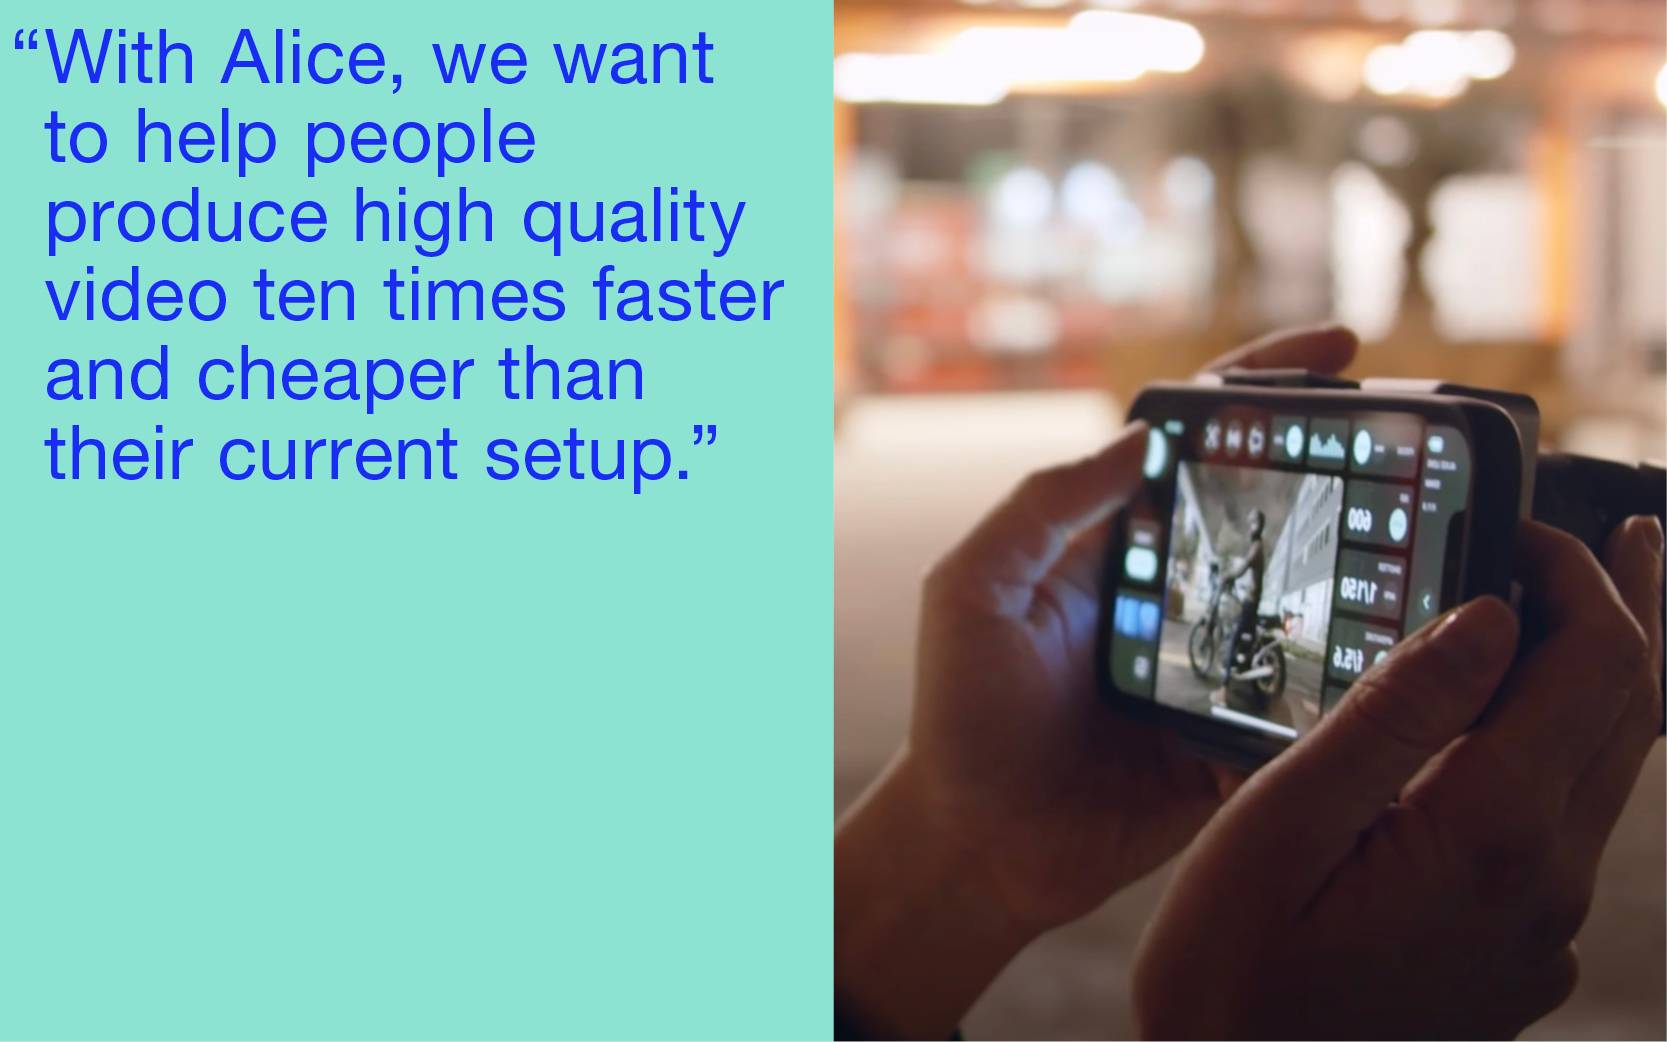 “With Alice, we want to help people produce high quality video ten times faster and cheaper than their current setup.” 